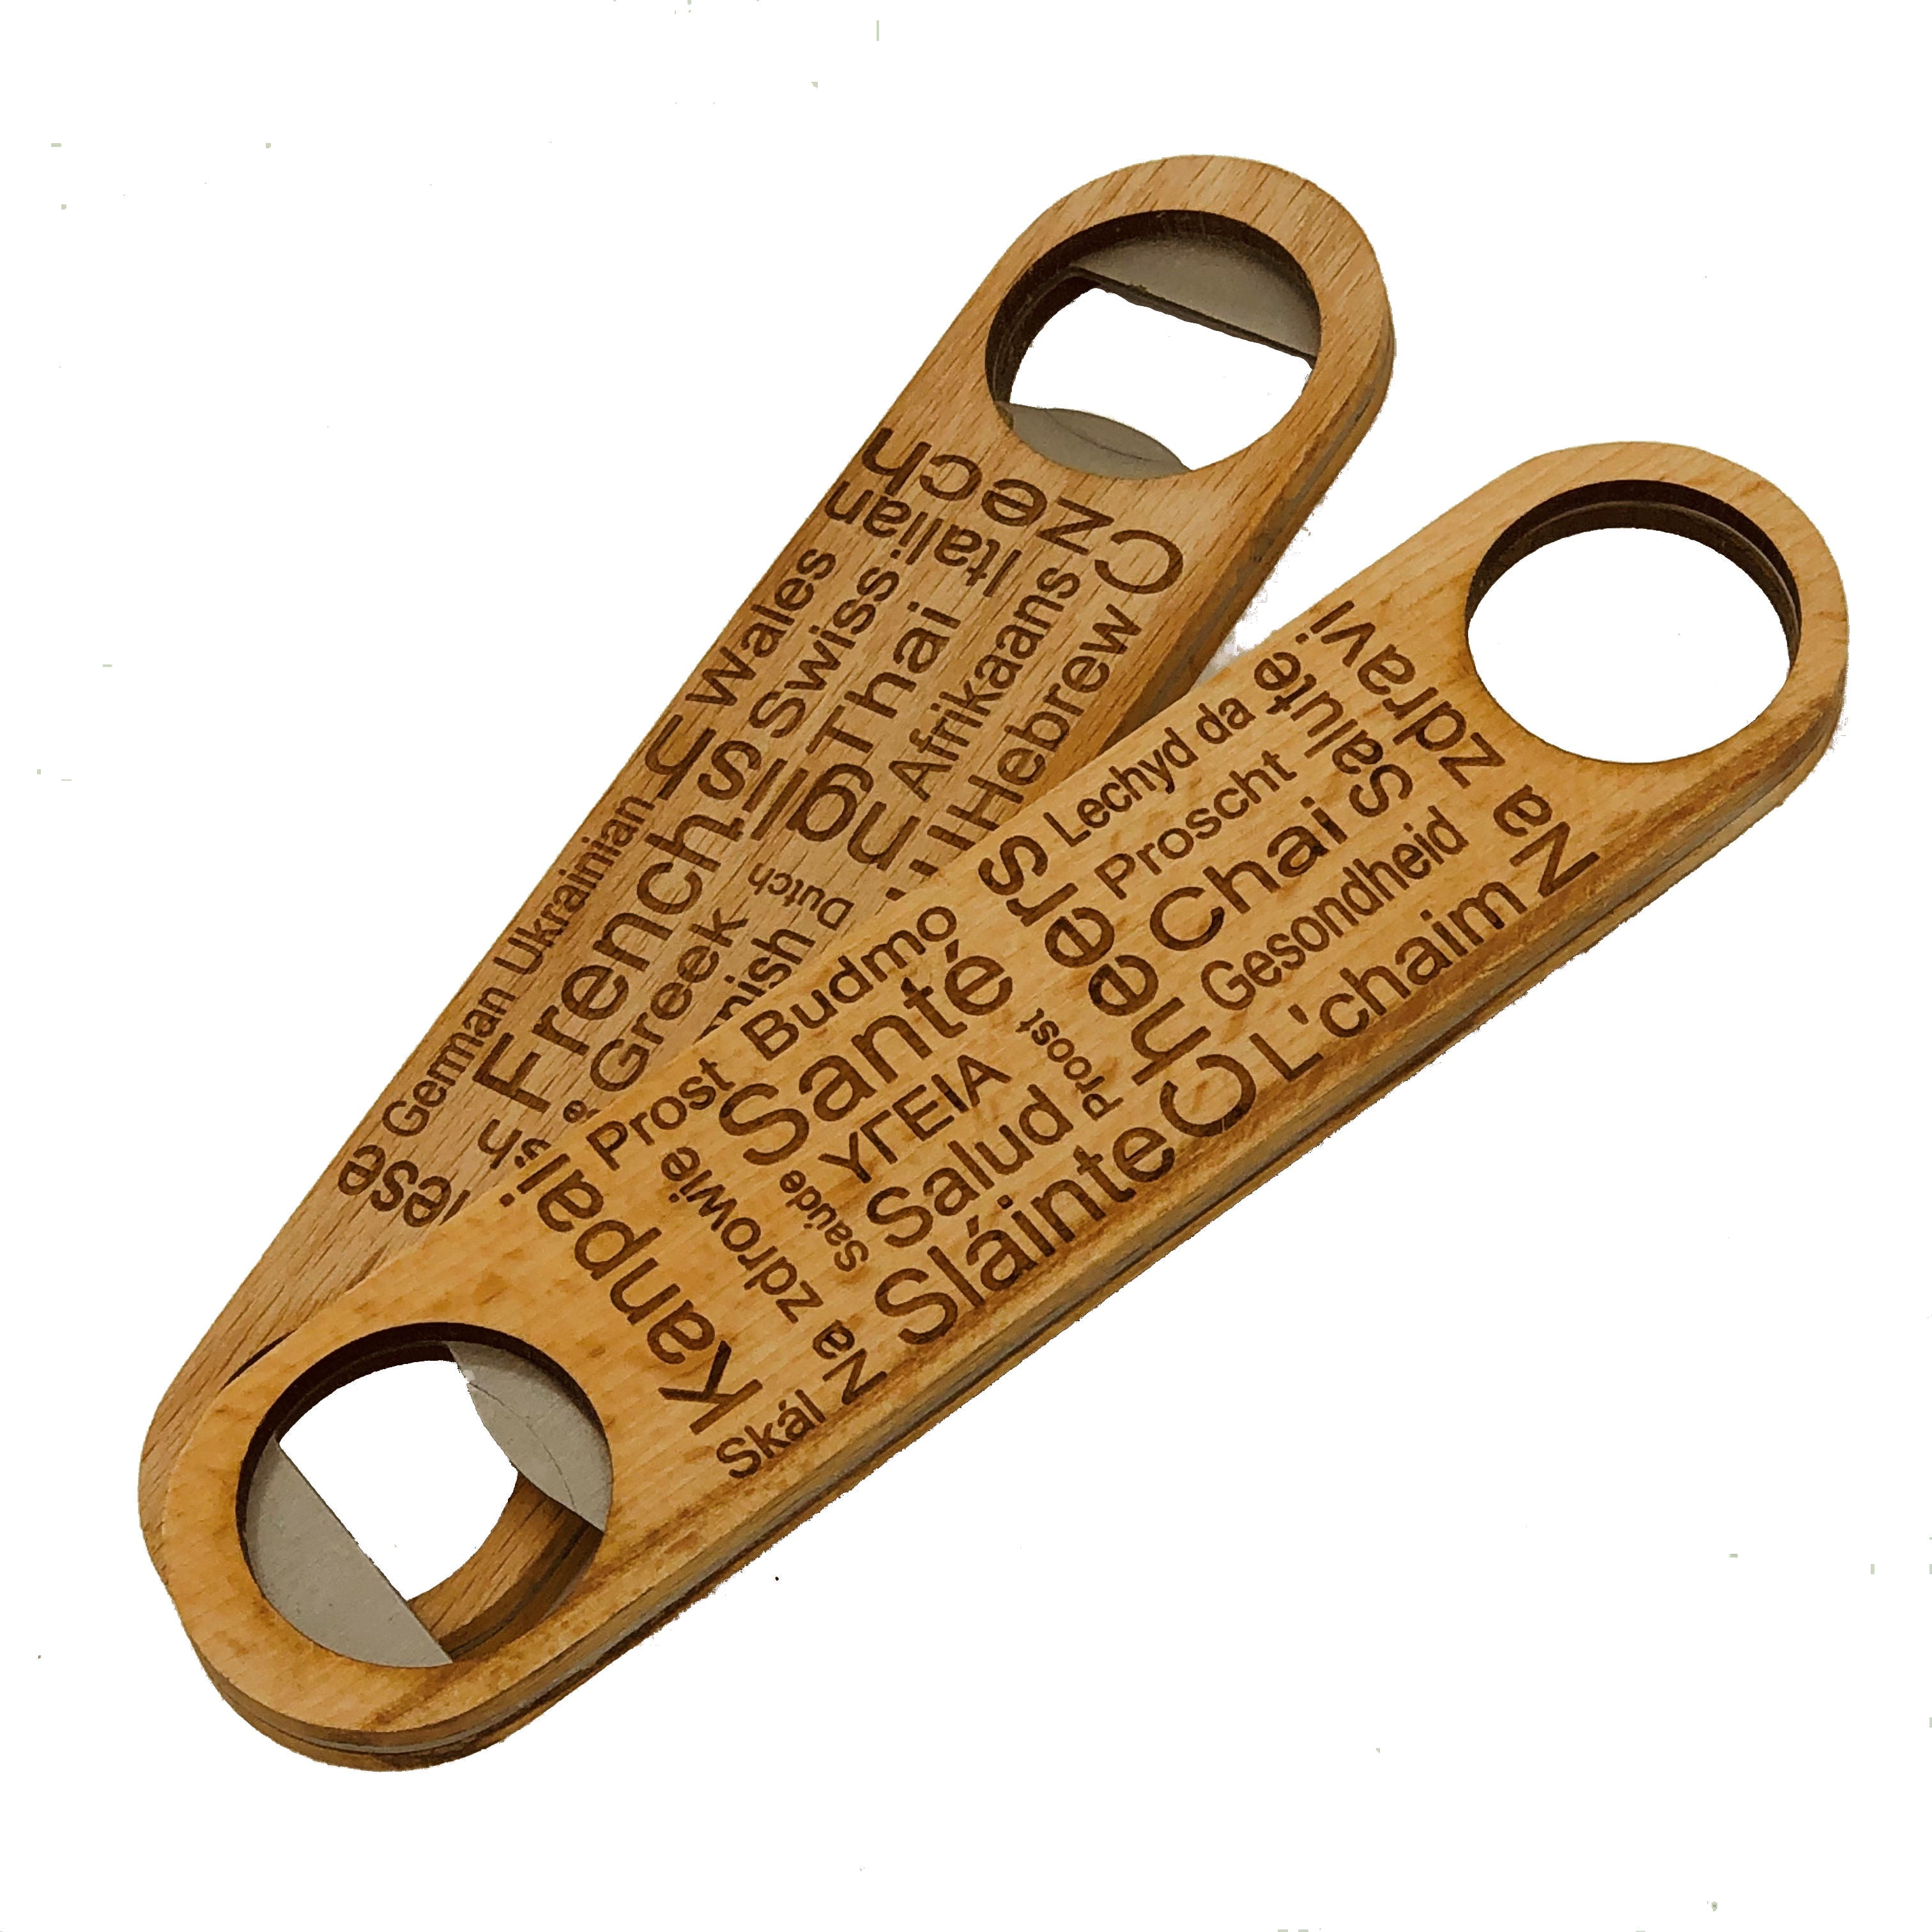 Wooden bottle opener gift - cheers in many languages